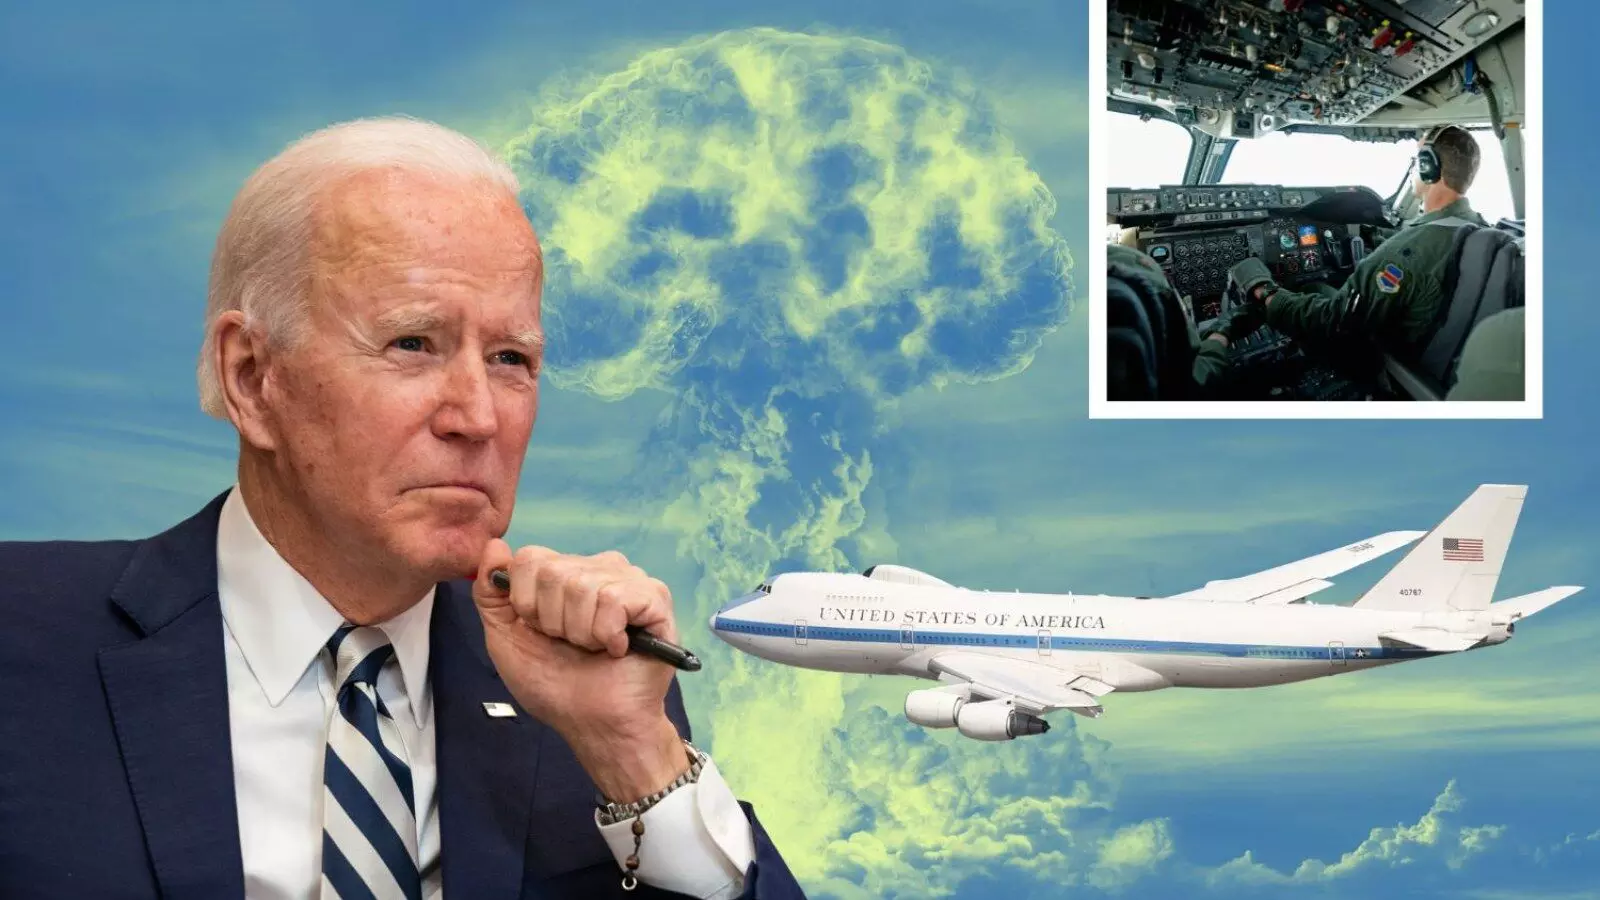 America orders to make Doomsday plane, will not be affected during nuclear attack